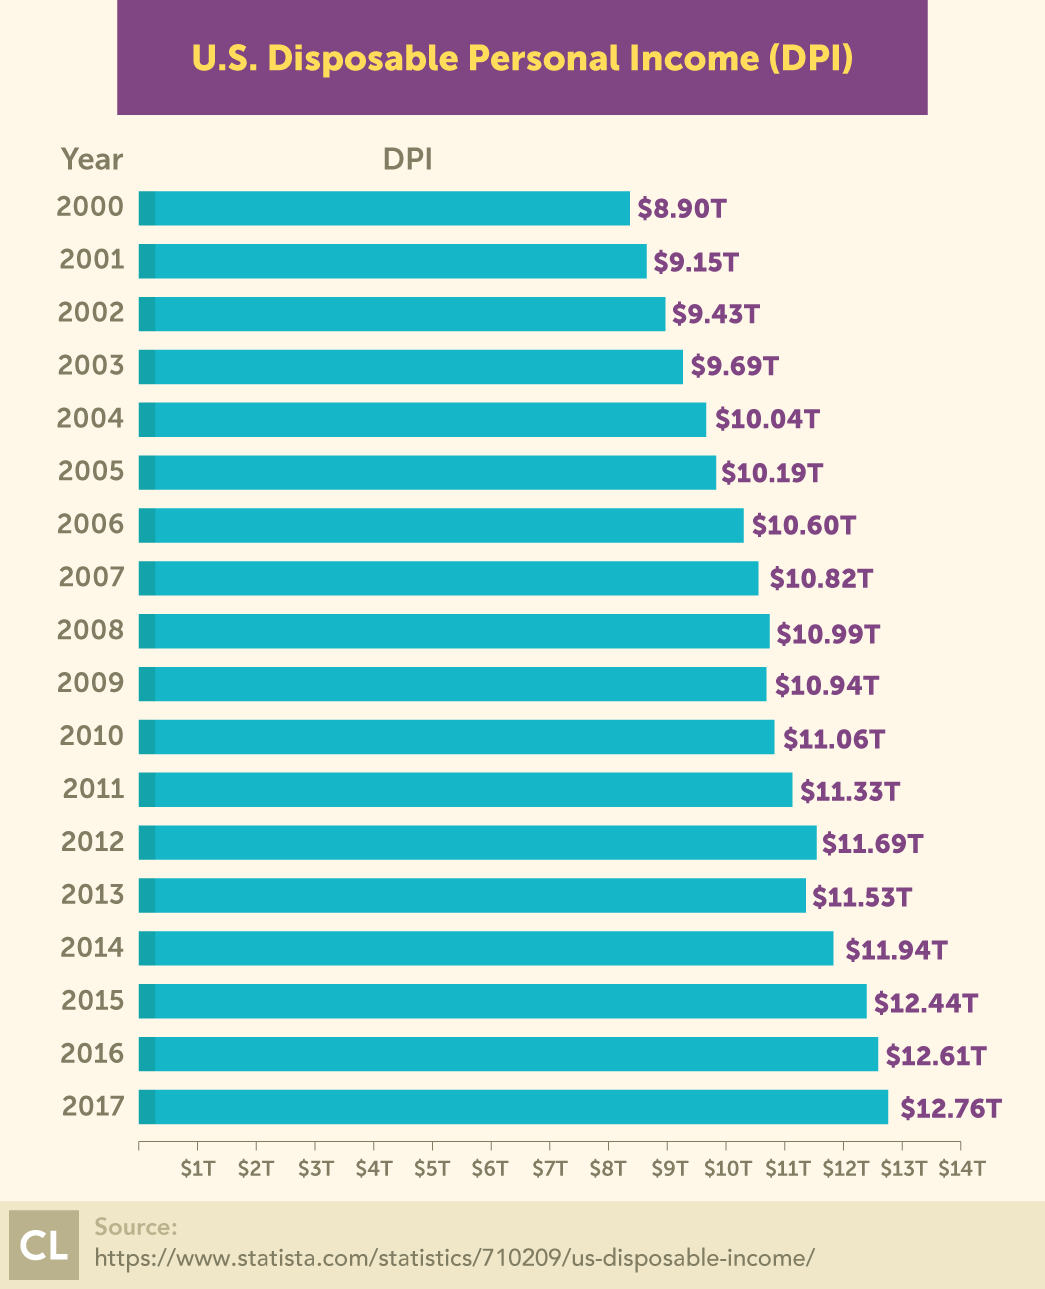 U.S. Disposable Personal Income (DPI) from 2000-2017